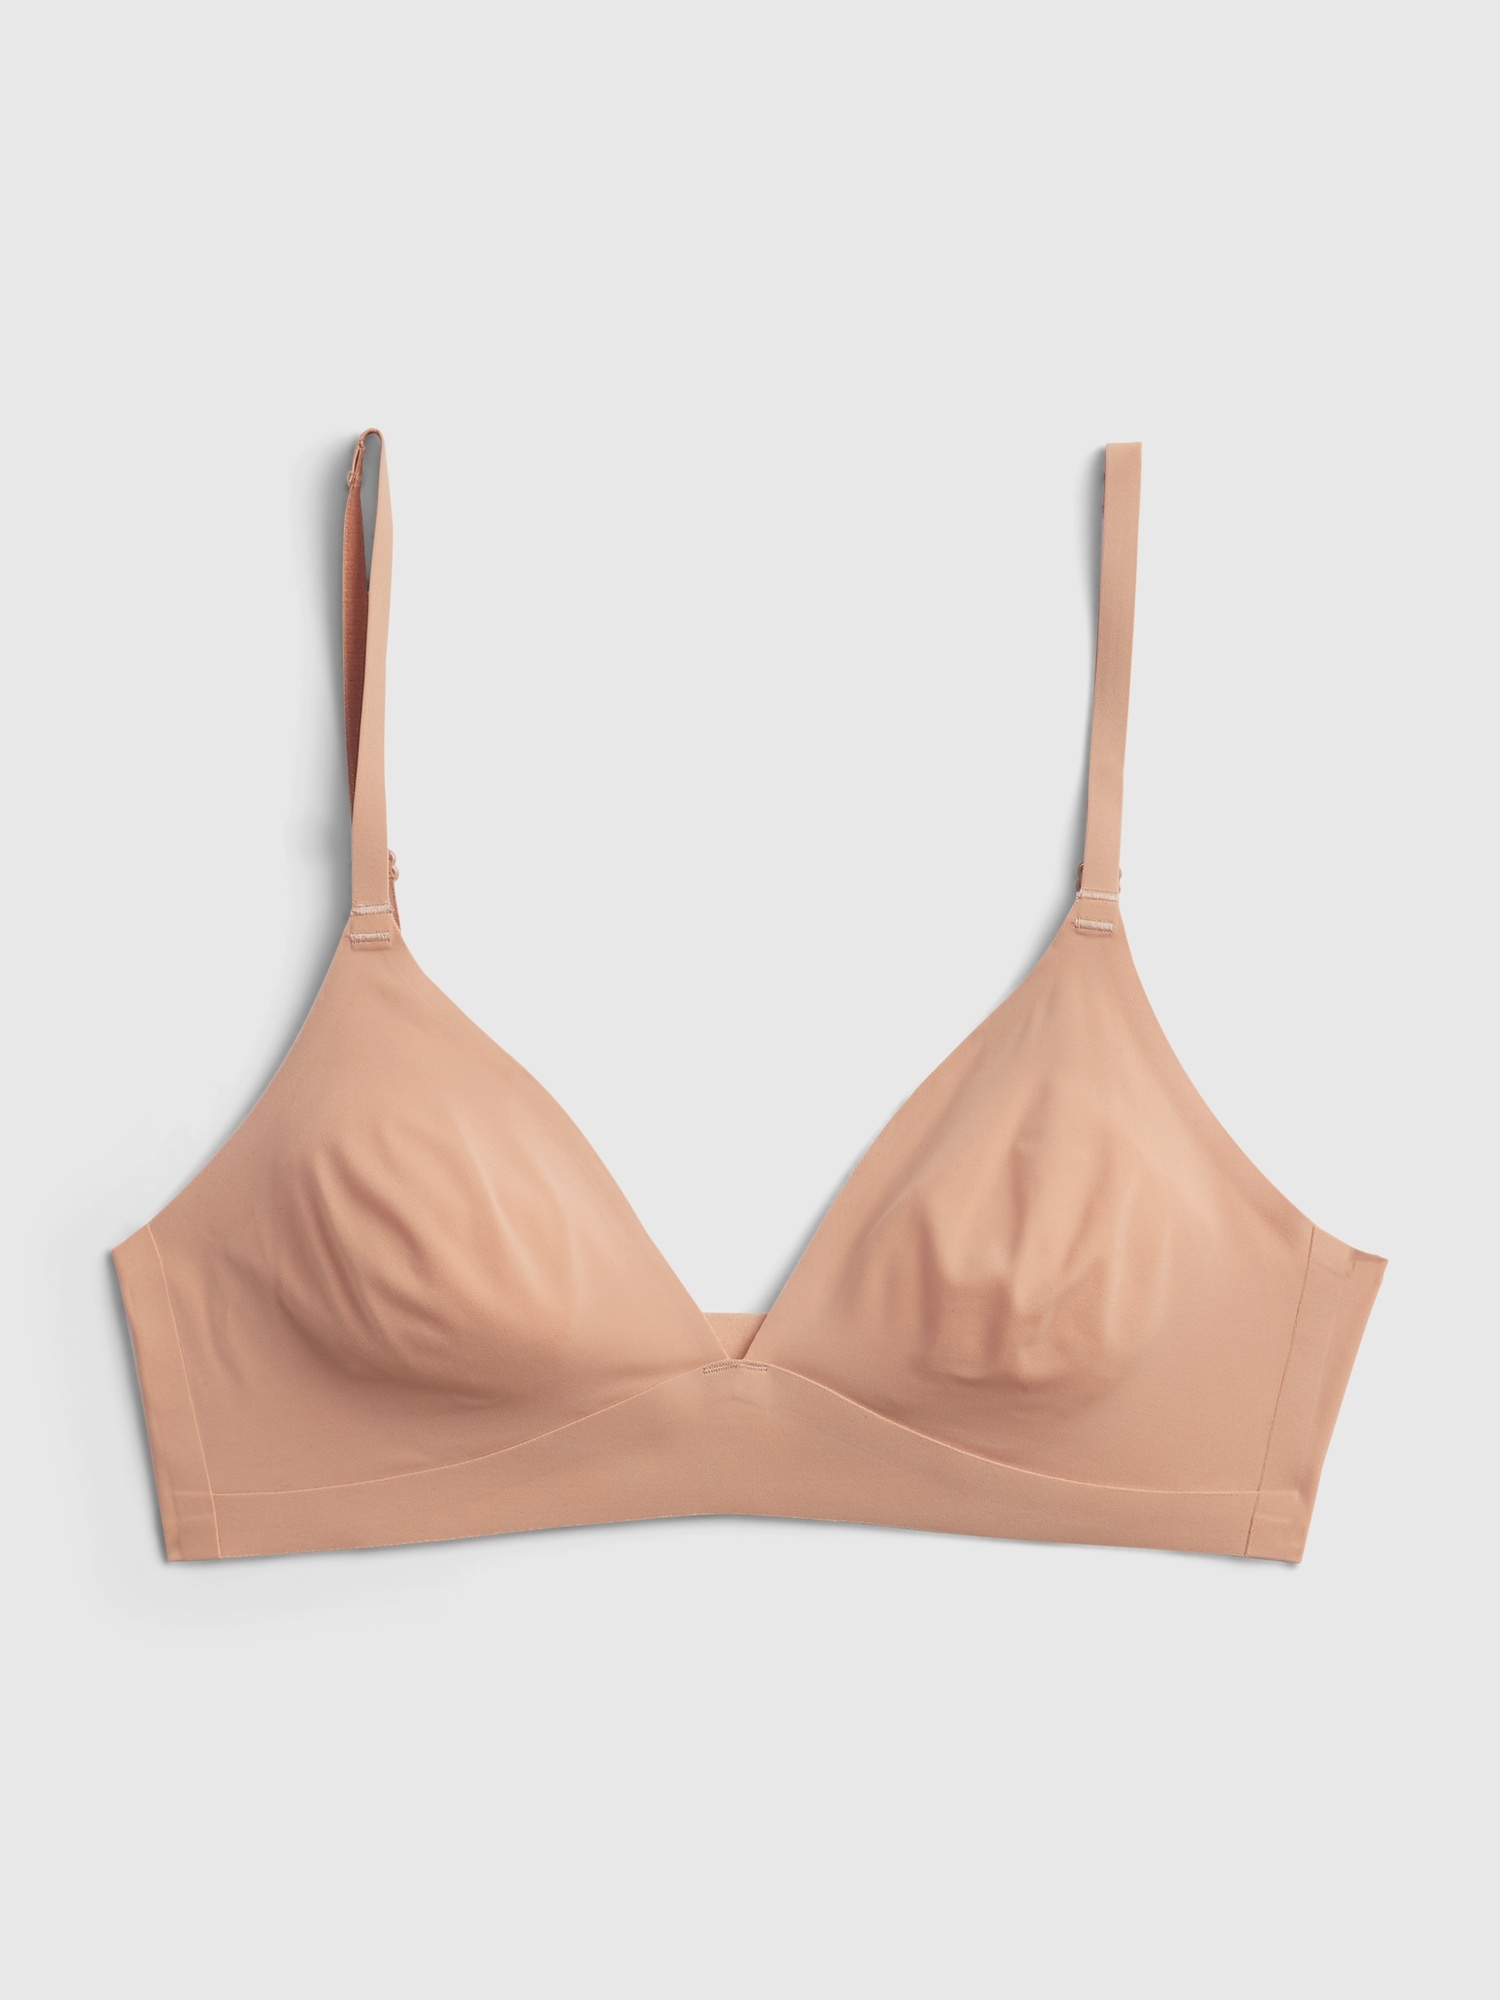 Take The Plunge With These No-Show Bras That're Surprisingly Comfortable